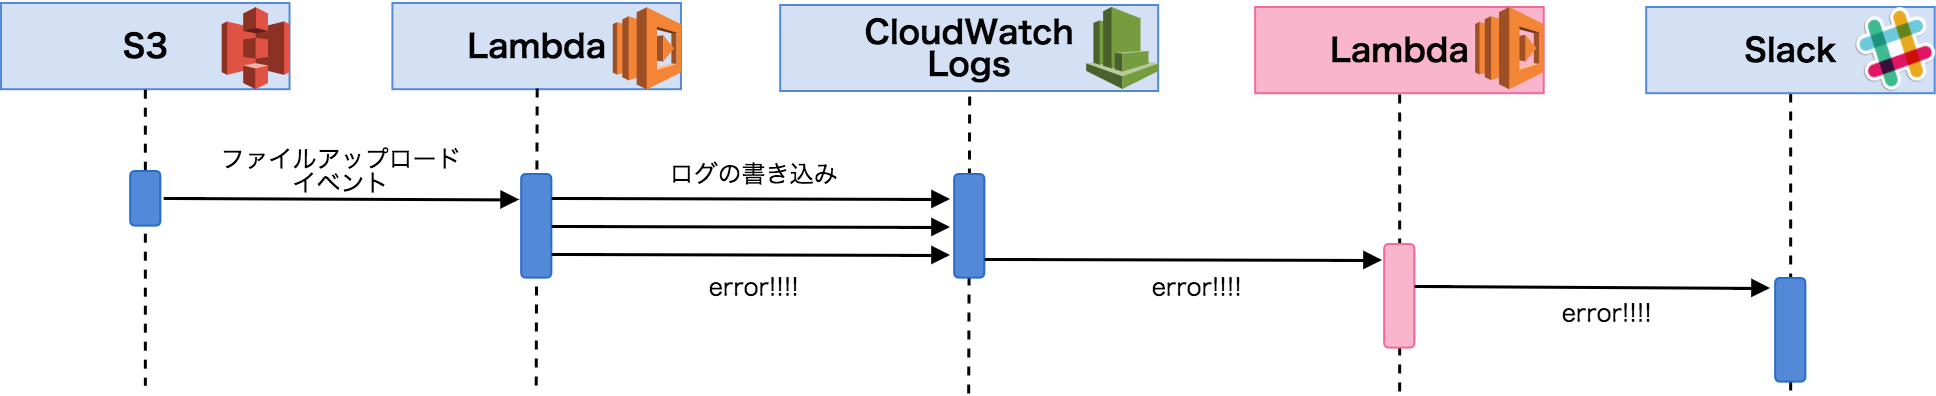 cloudwatchlogs.png